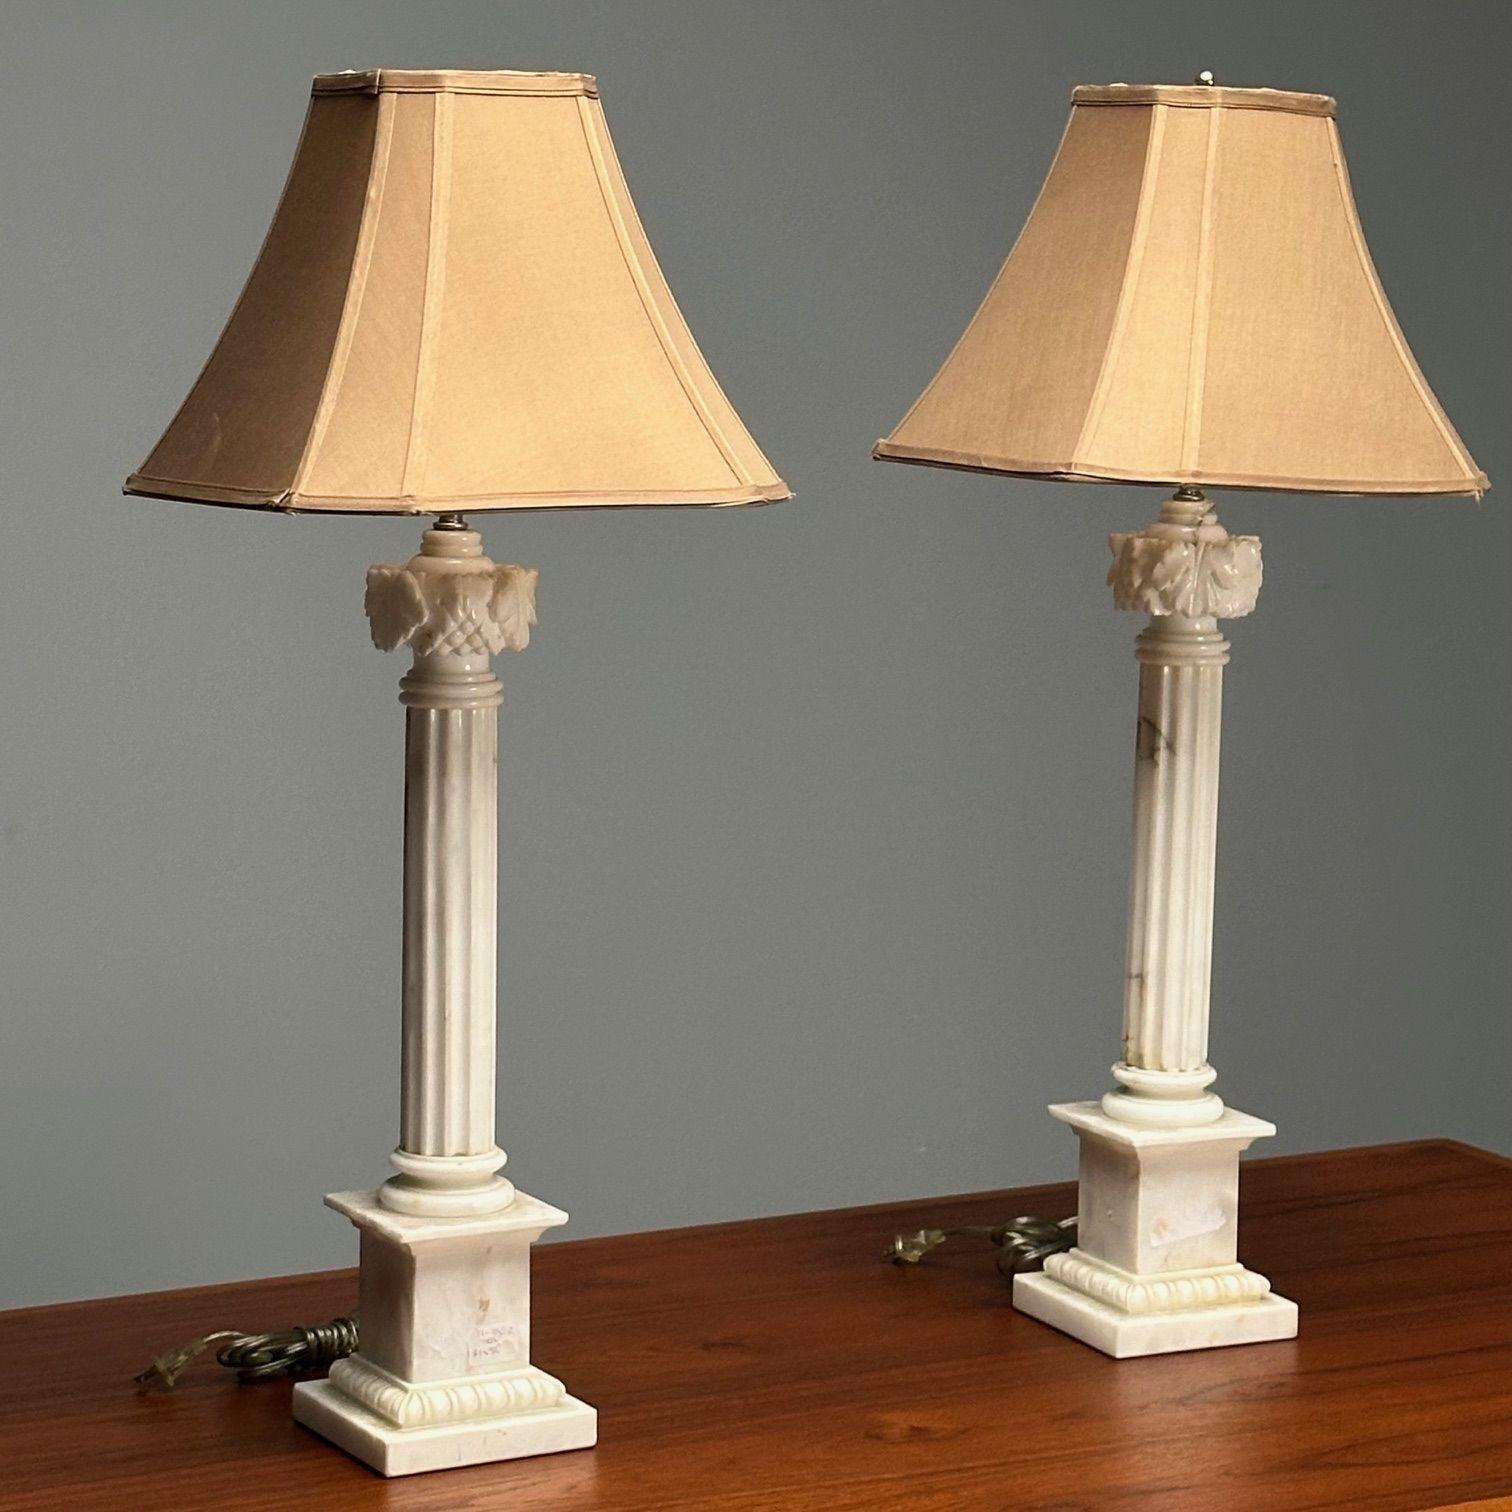 Carrara Marble Italian Neoclassical, Column Motif Table Lamps, Marble, Italy, 1950s For Sale